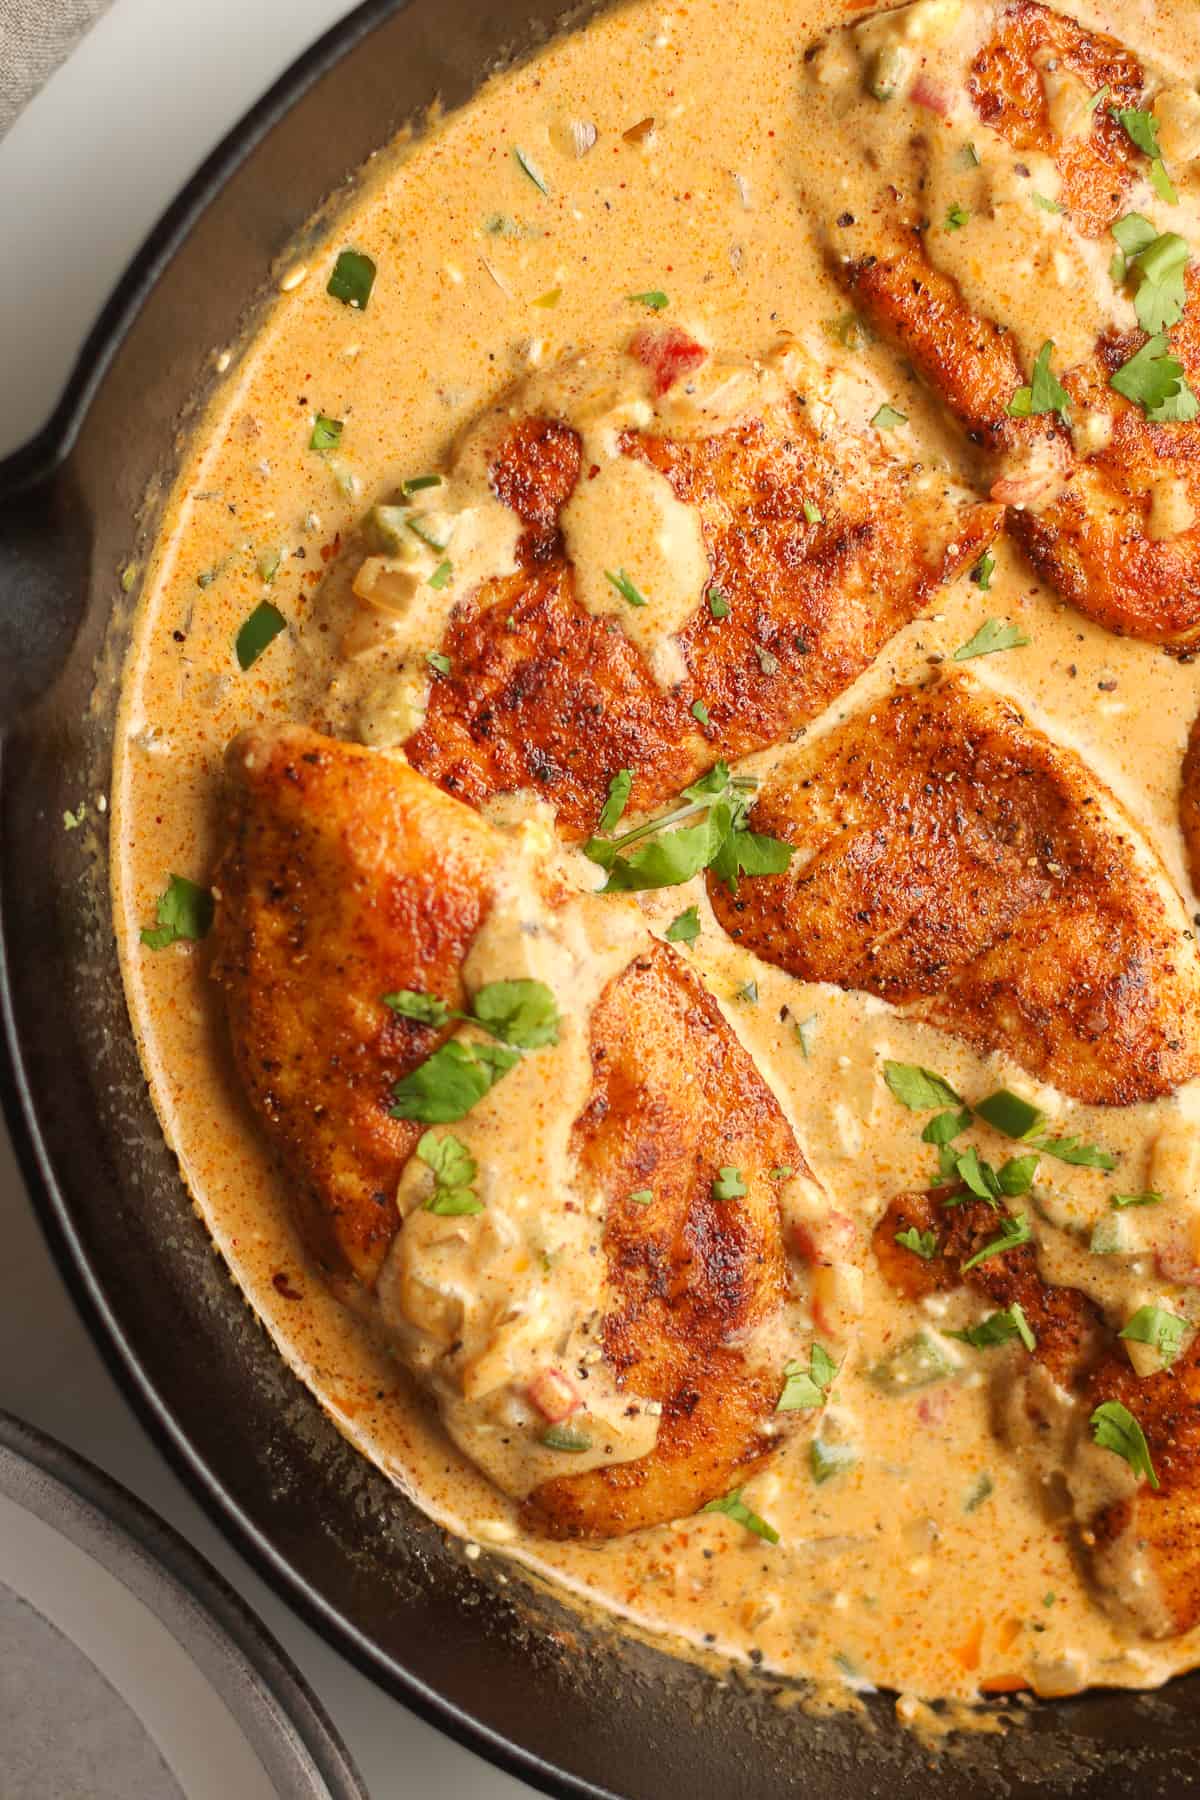 Closeup on the skillet of seared chicken in the jalapeño sauce.